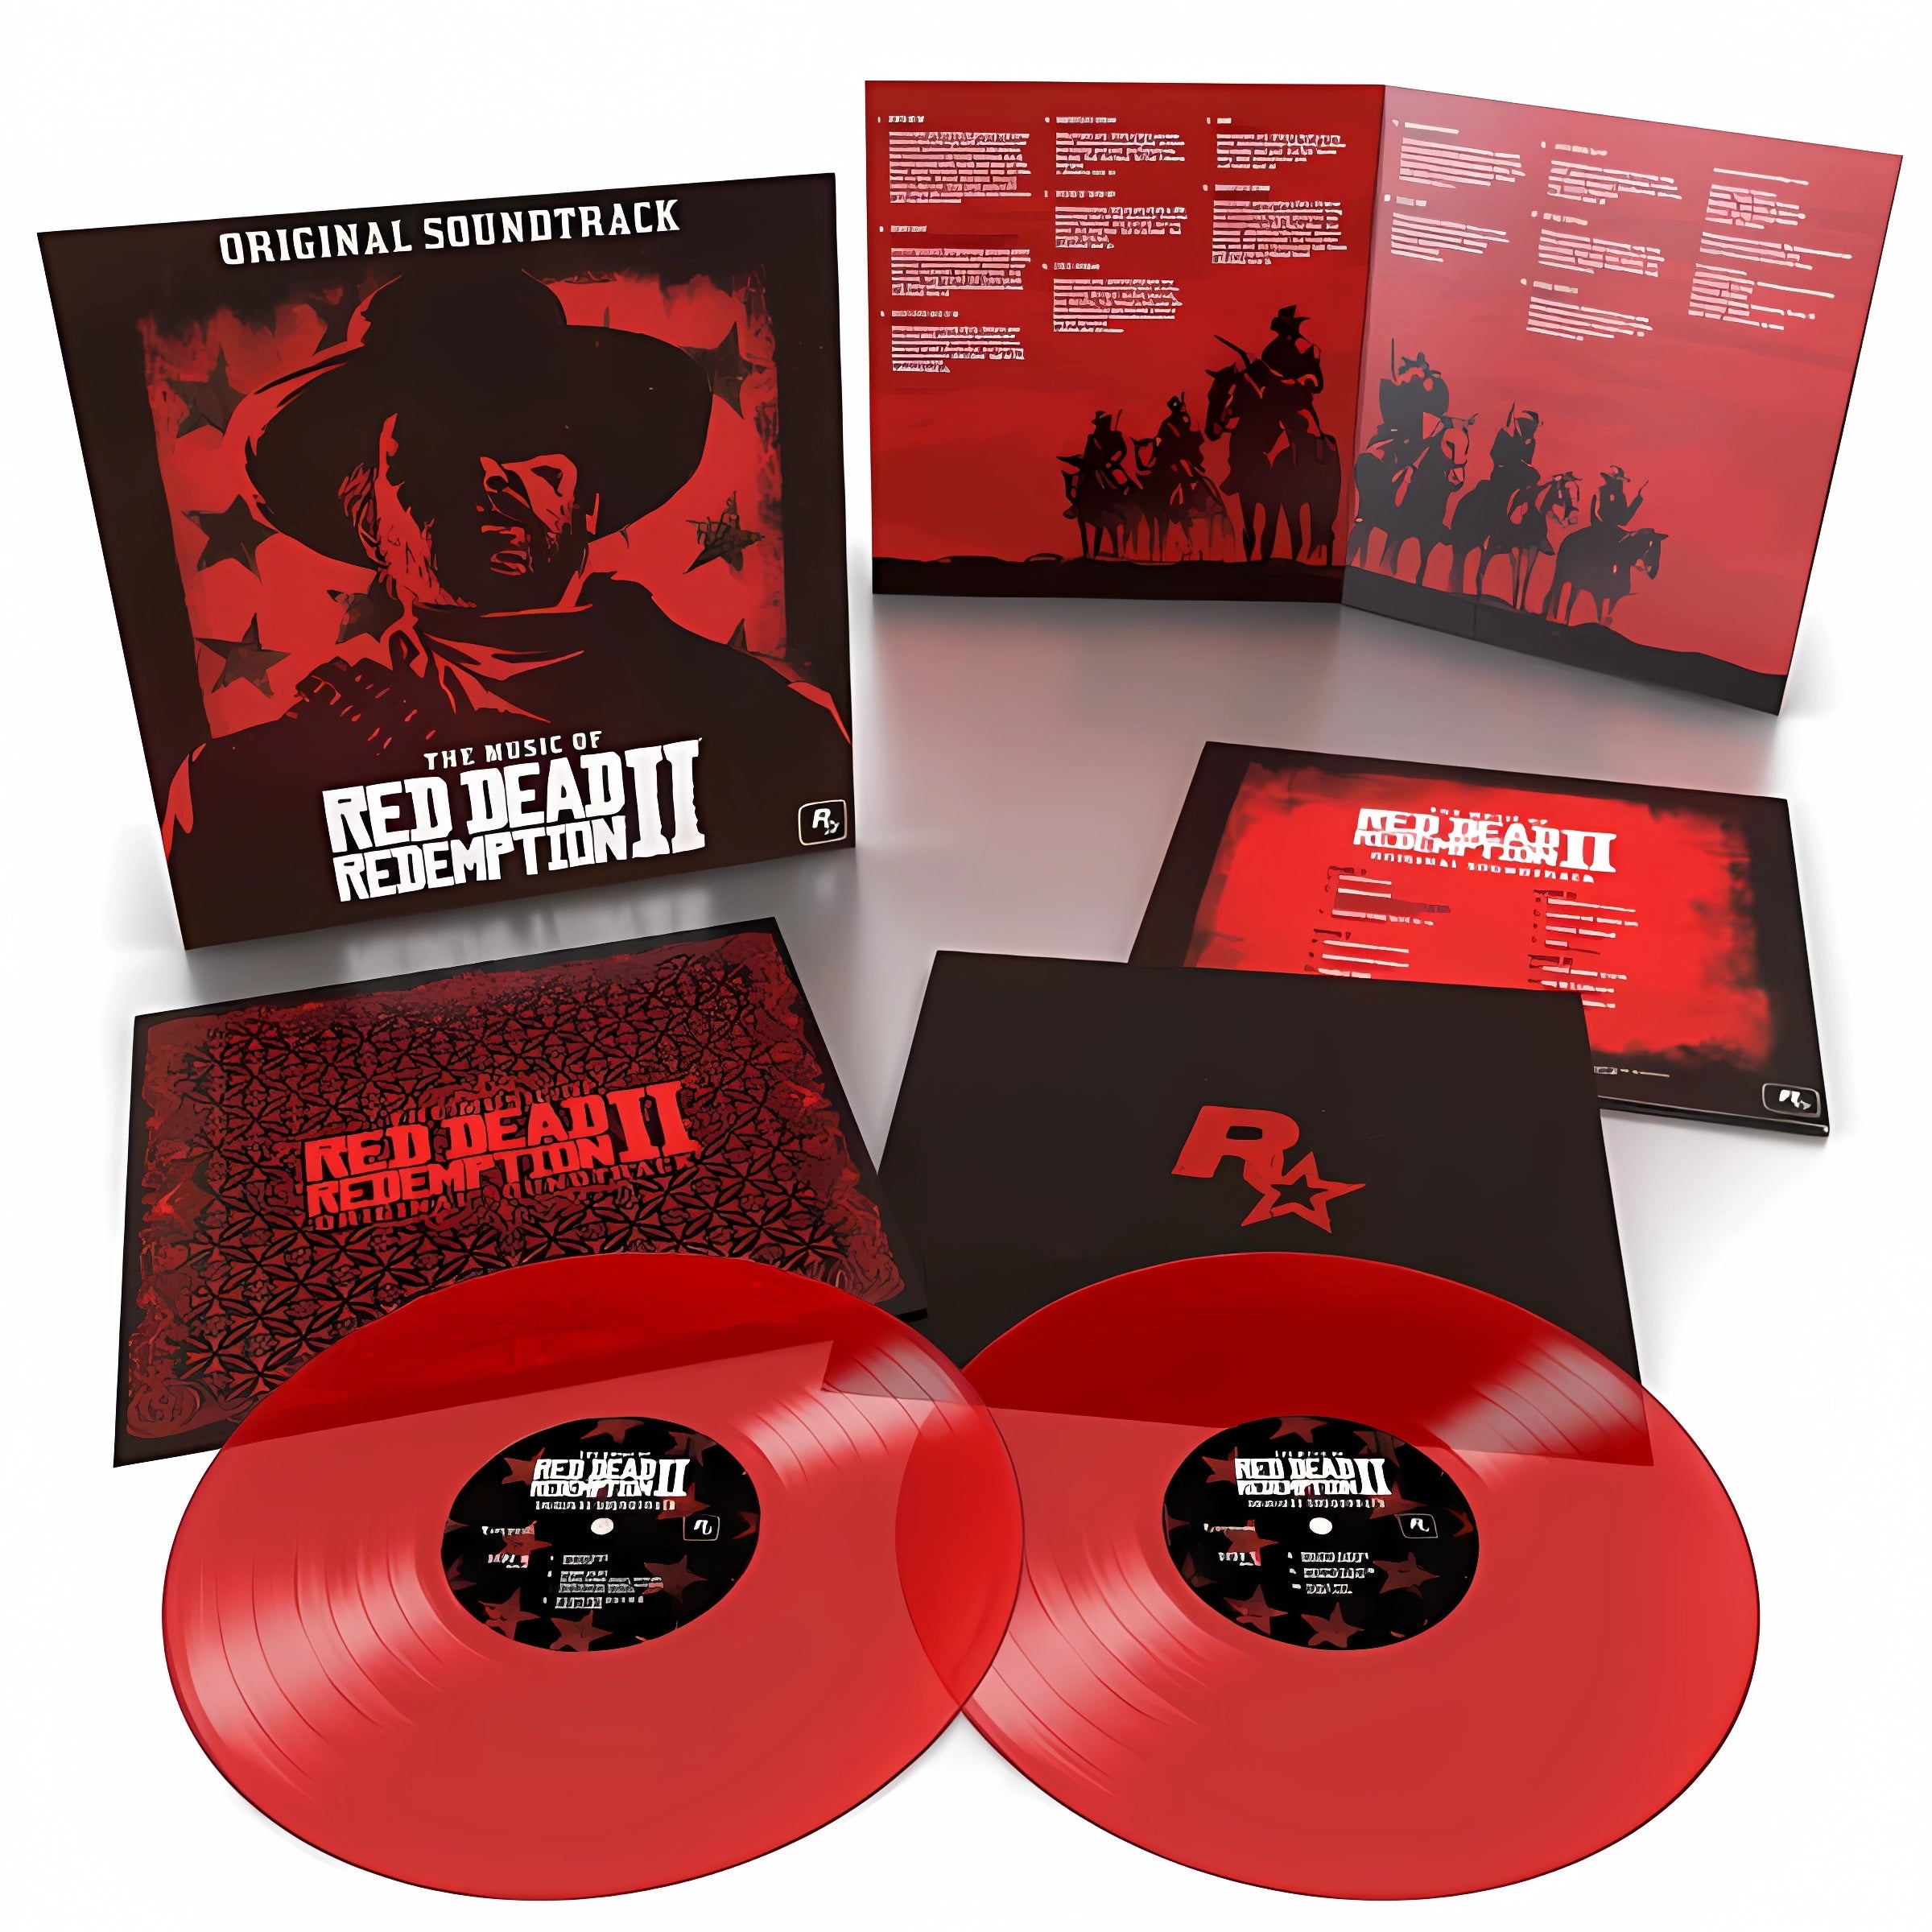 The Music of Red Dead Redemption 2 | Original Soundtrack | Translucent Red Vinyl | Contents